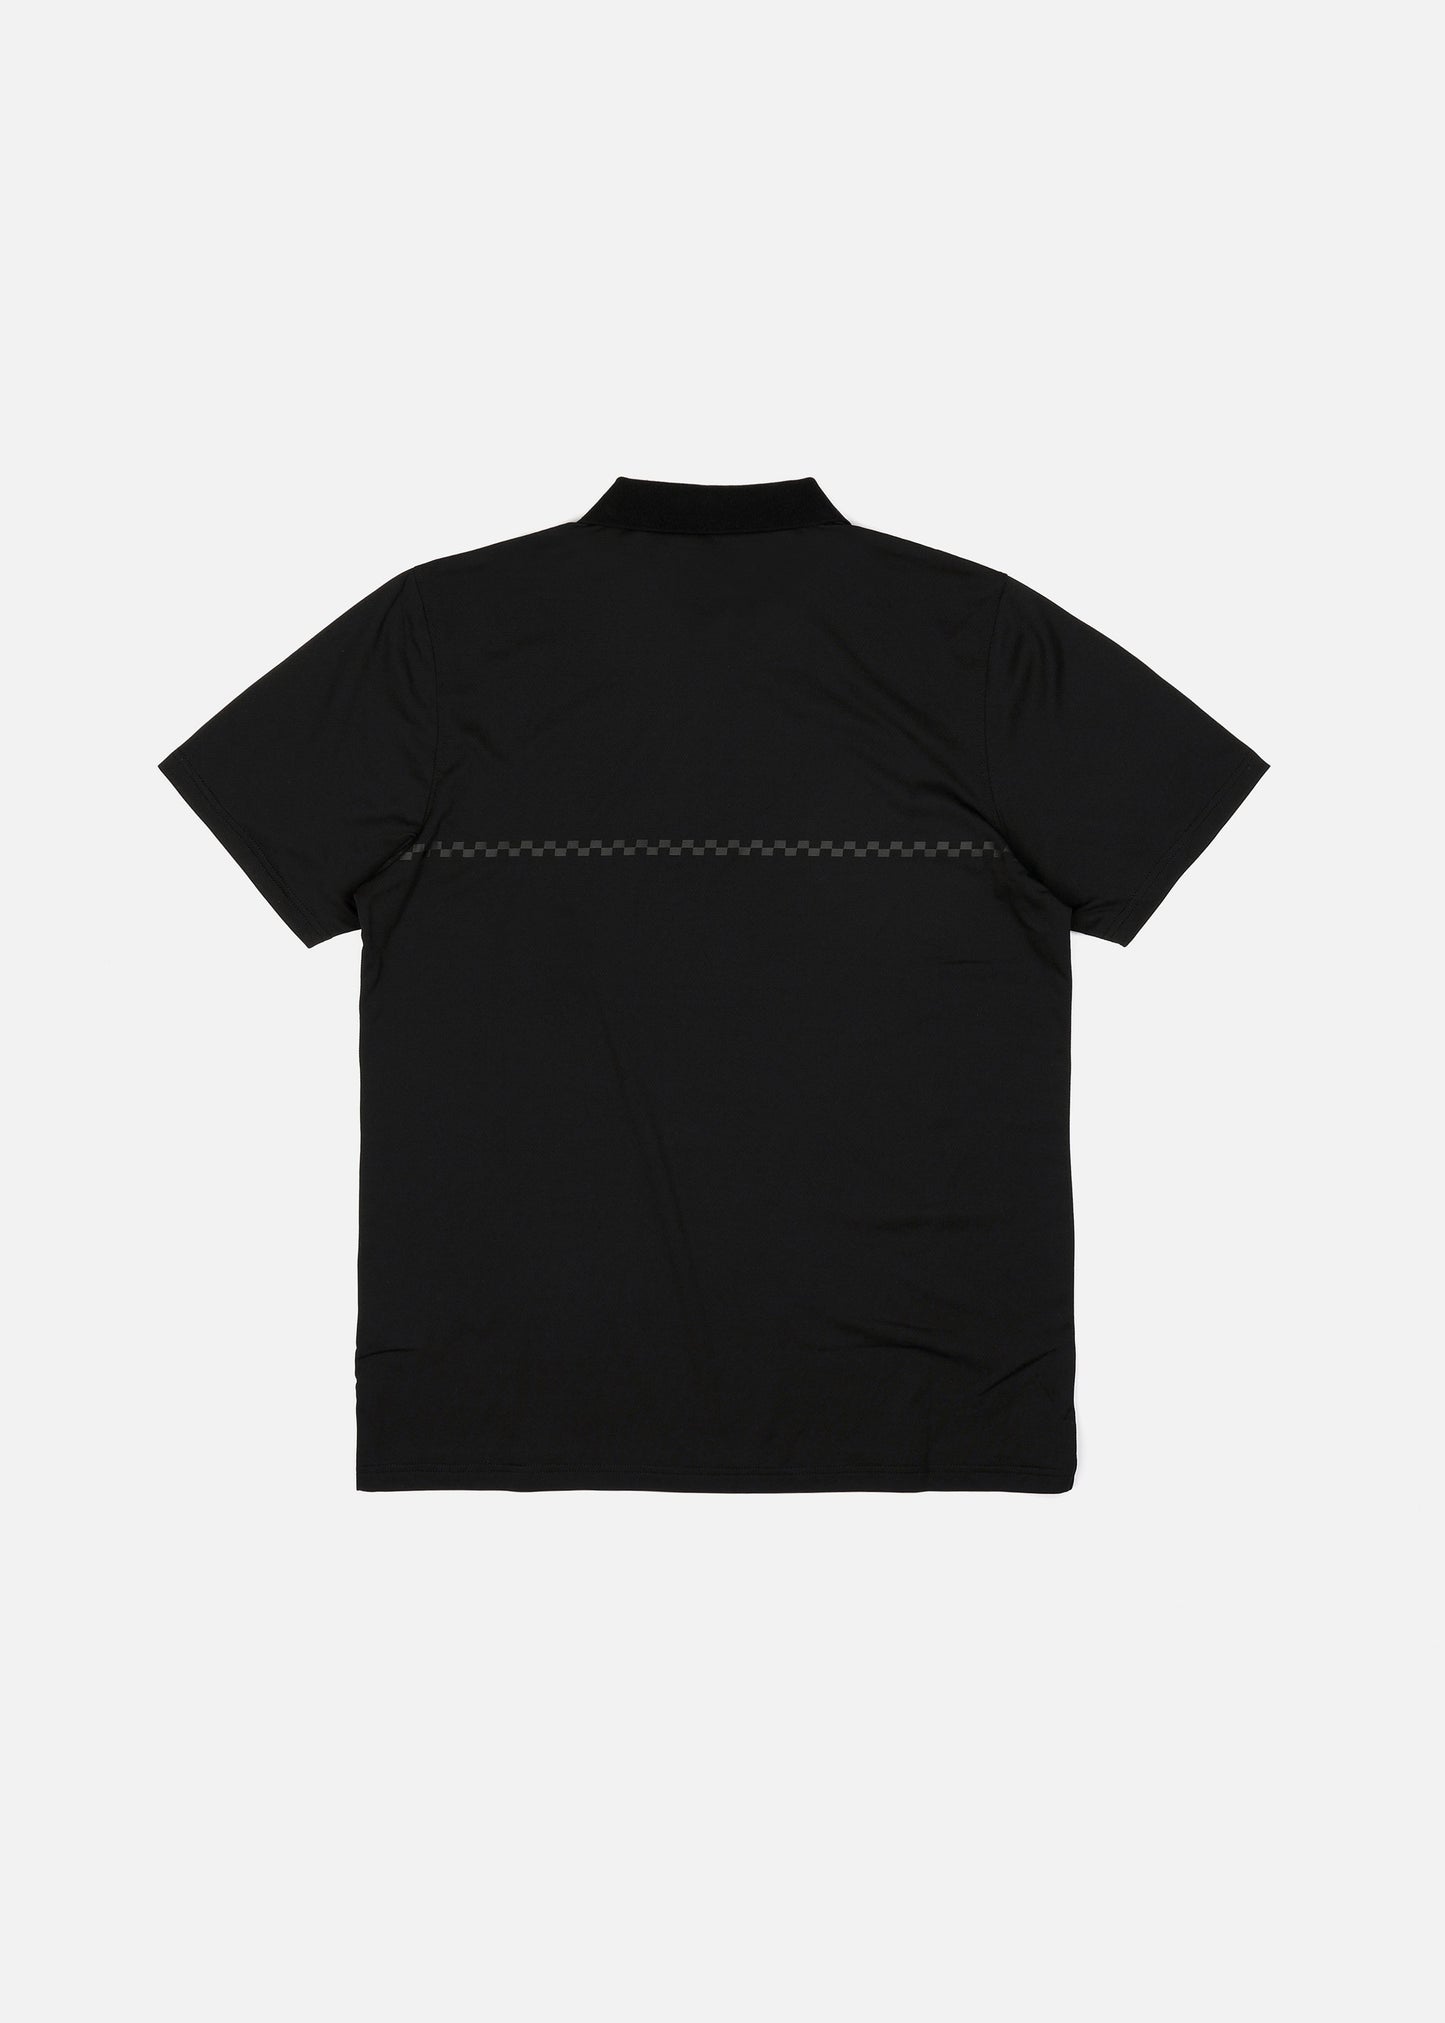 GRAND PROJECT SS POLO : BLACK